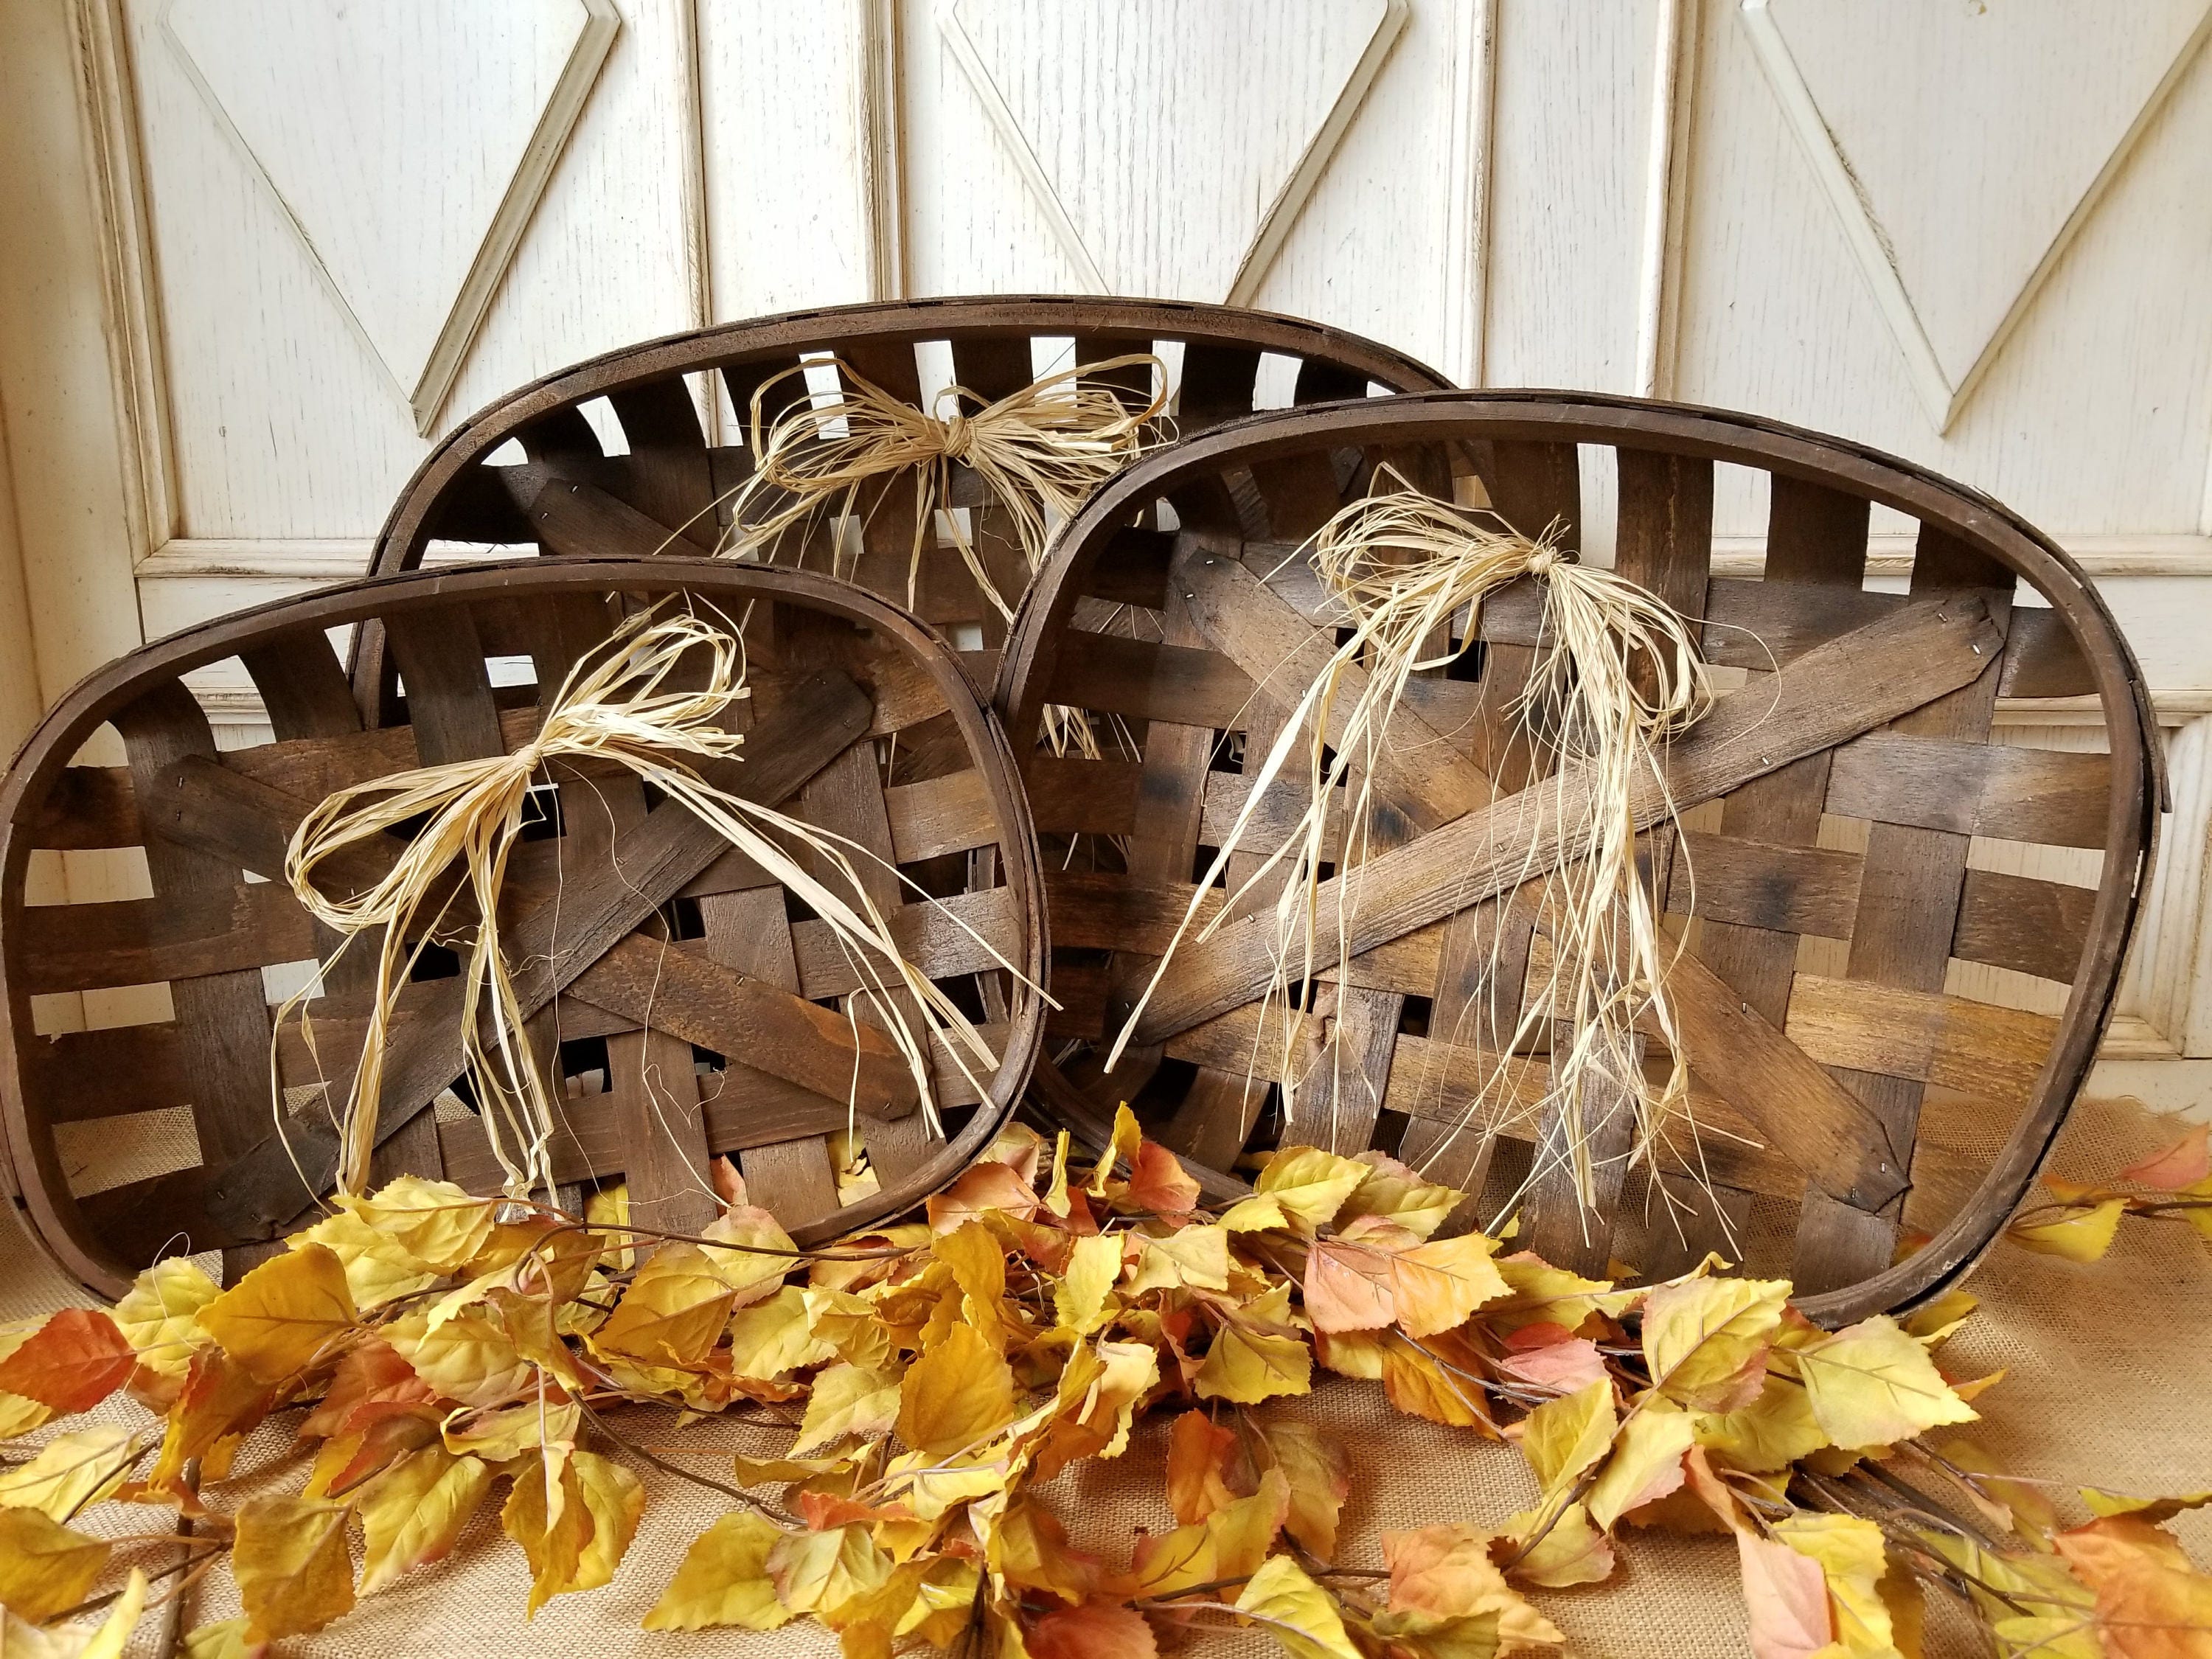 Set of 3 Tobacco Baskets, Farmhouse style tobacco baskets, Fixer upper style